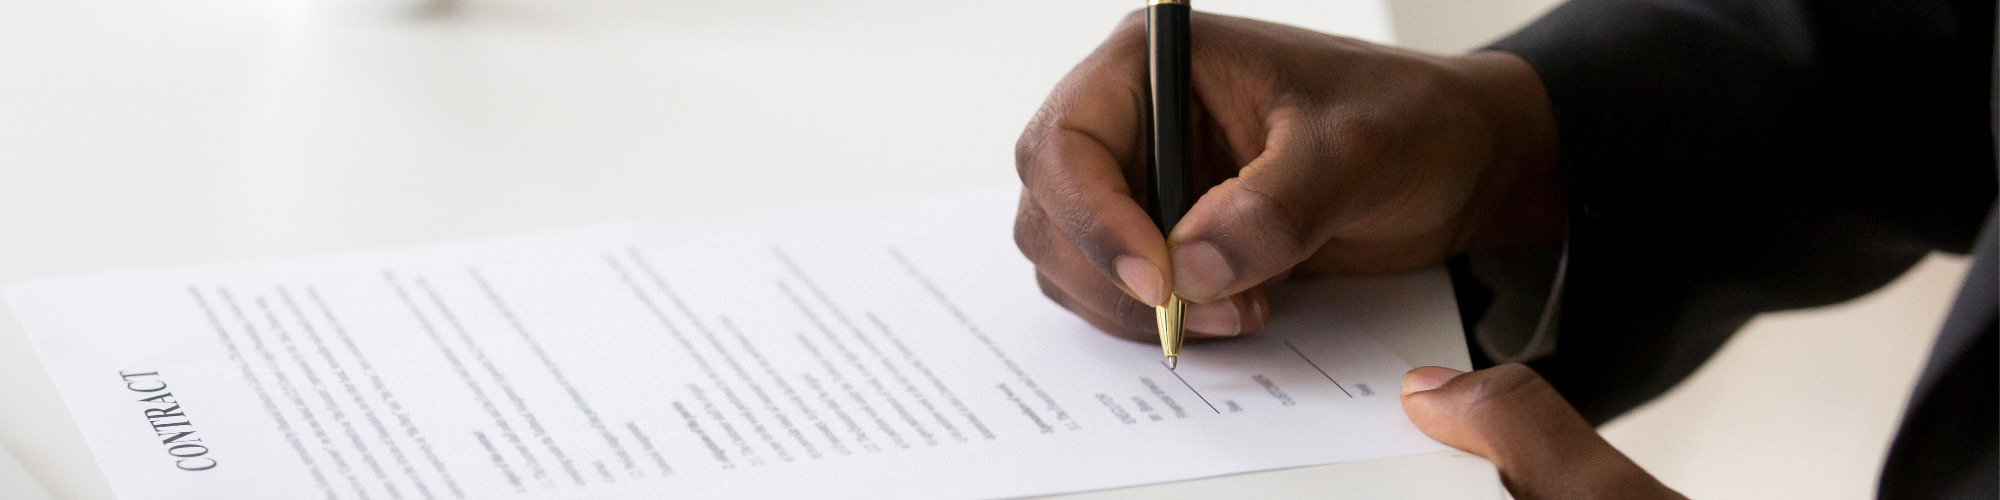 Drafting Enforceable Commercial Contracts - Key Considerations for Commercial Lawyers 